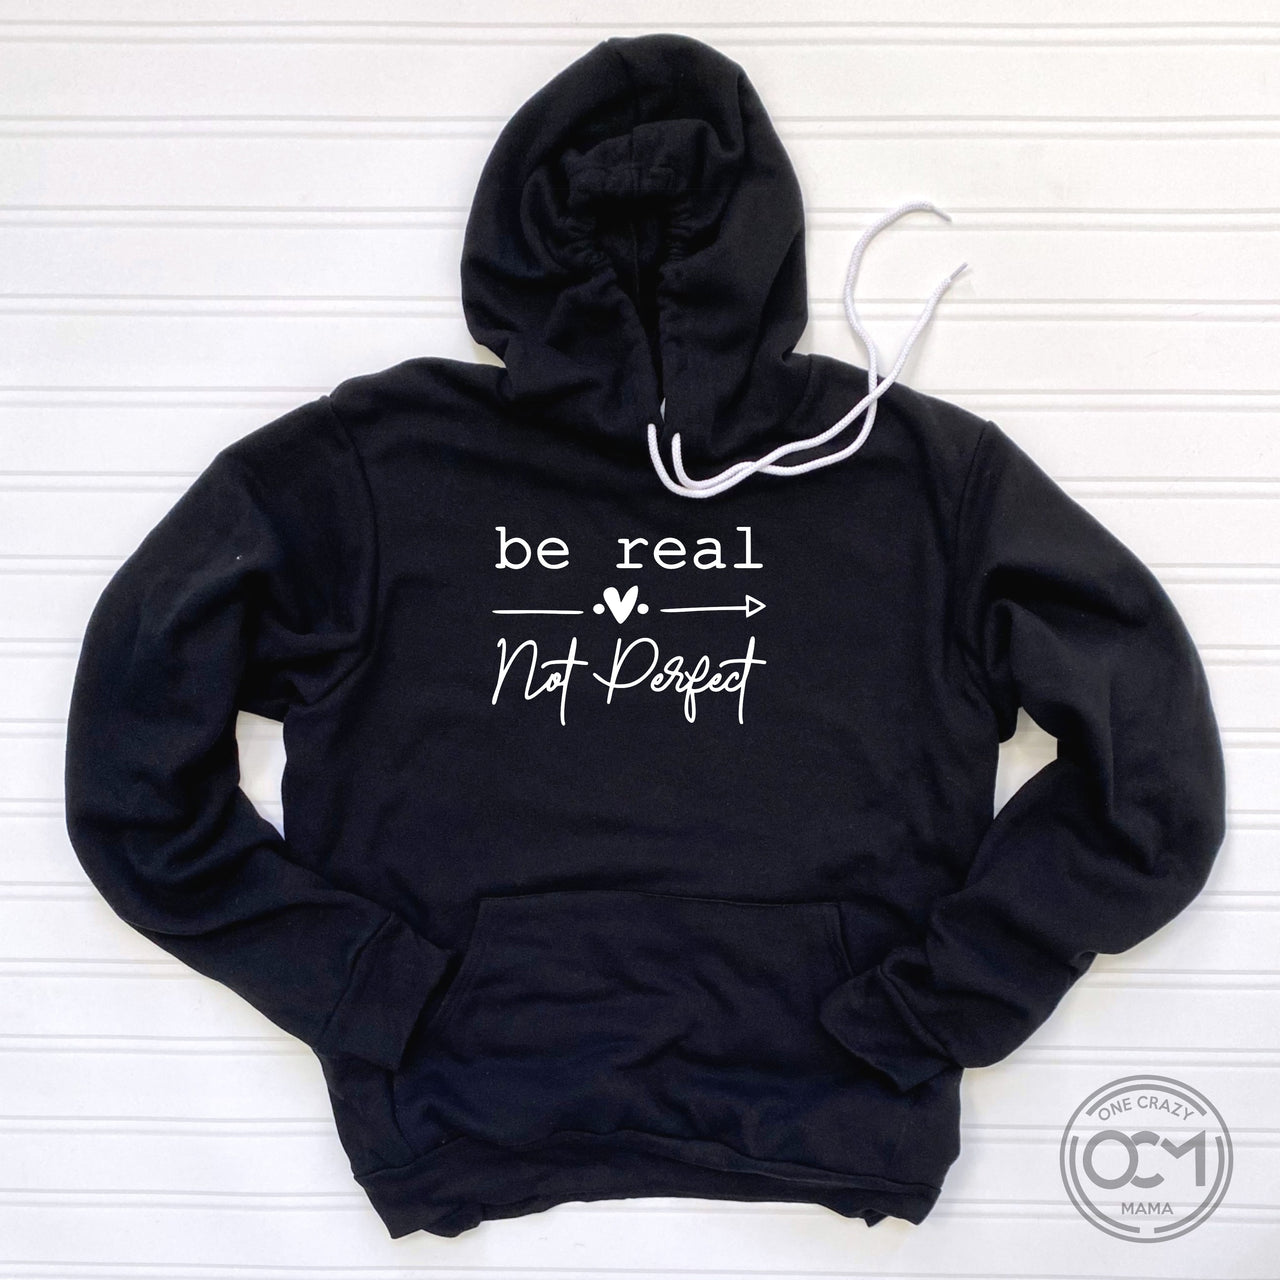 Adult - Unisex Hooded Pullover Sweatshirt - (Be Real Not Perfect)